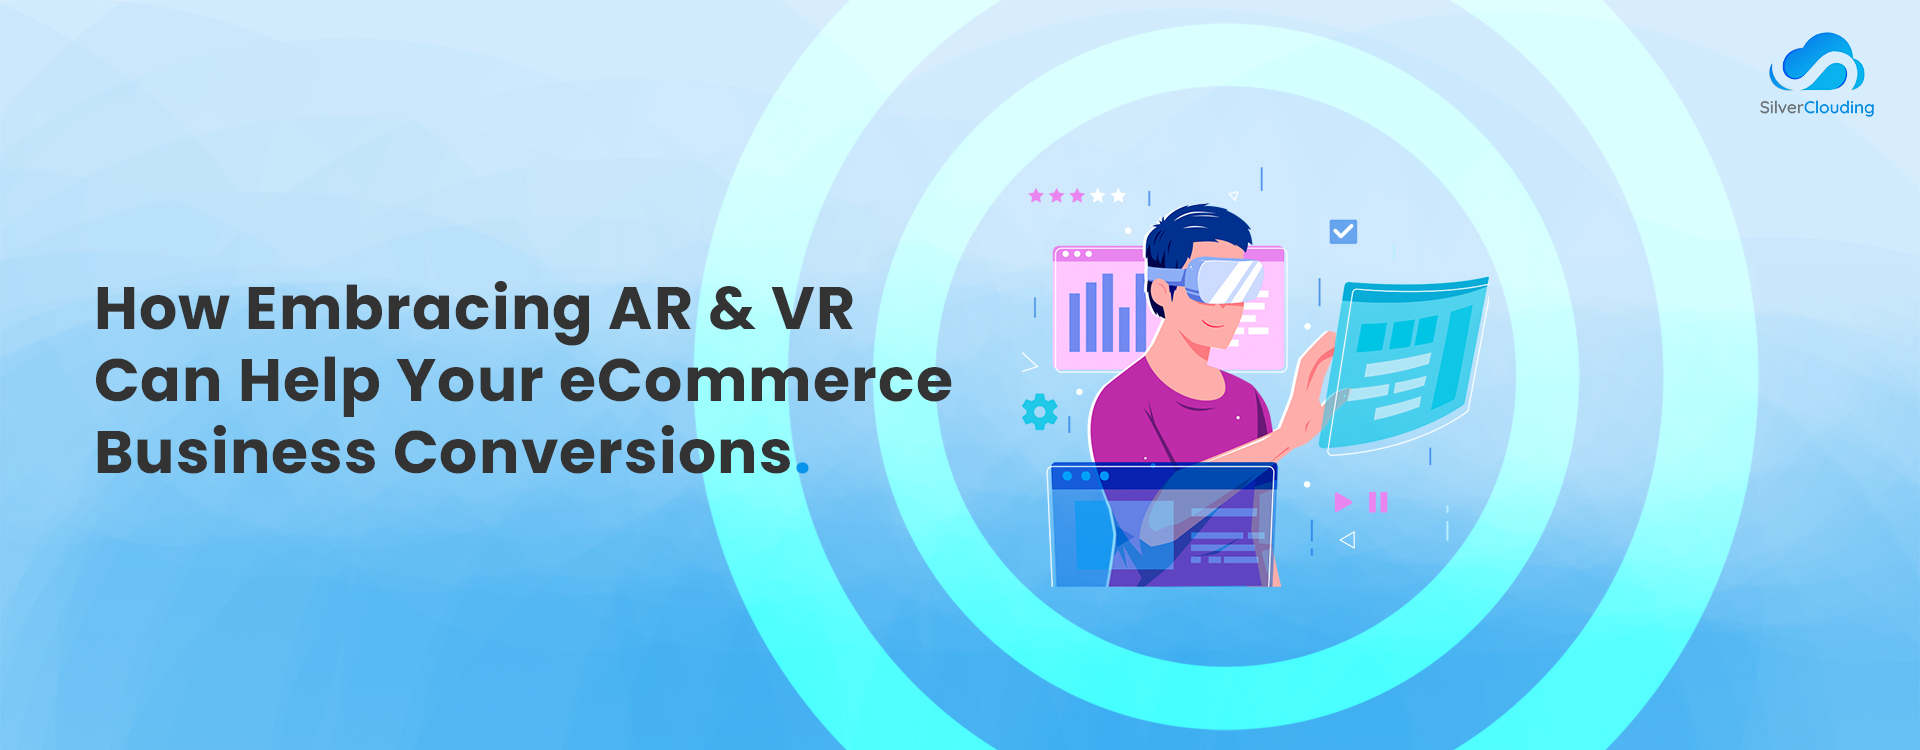 How Embracing AR & VR Can Help Your E-commerce Business Conversions